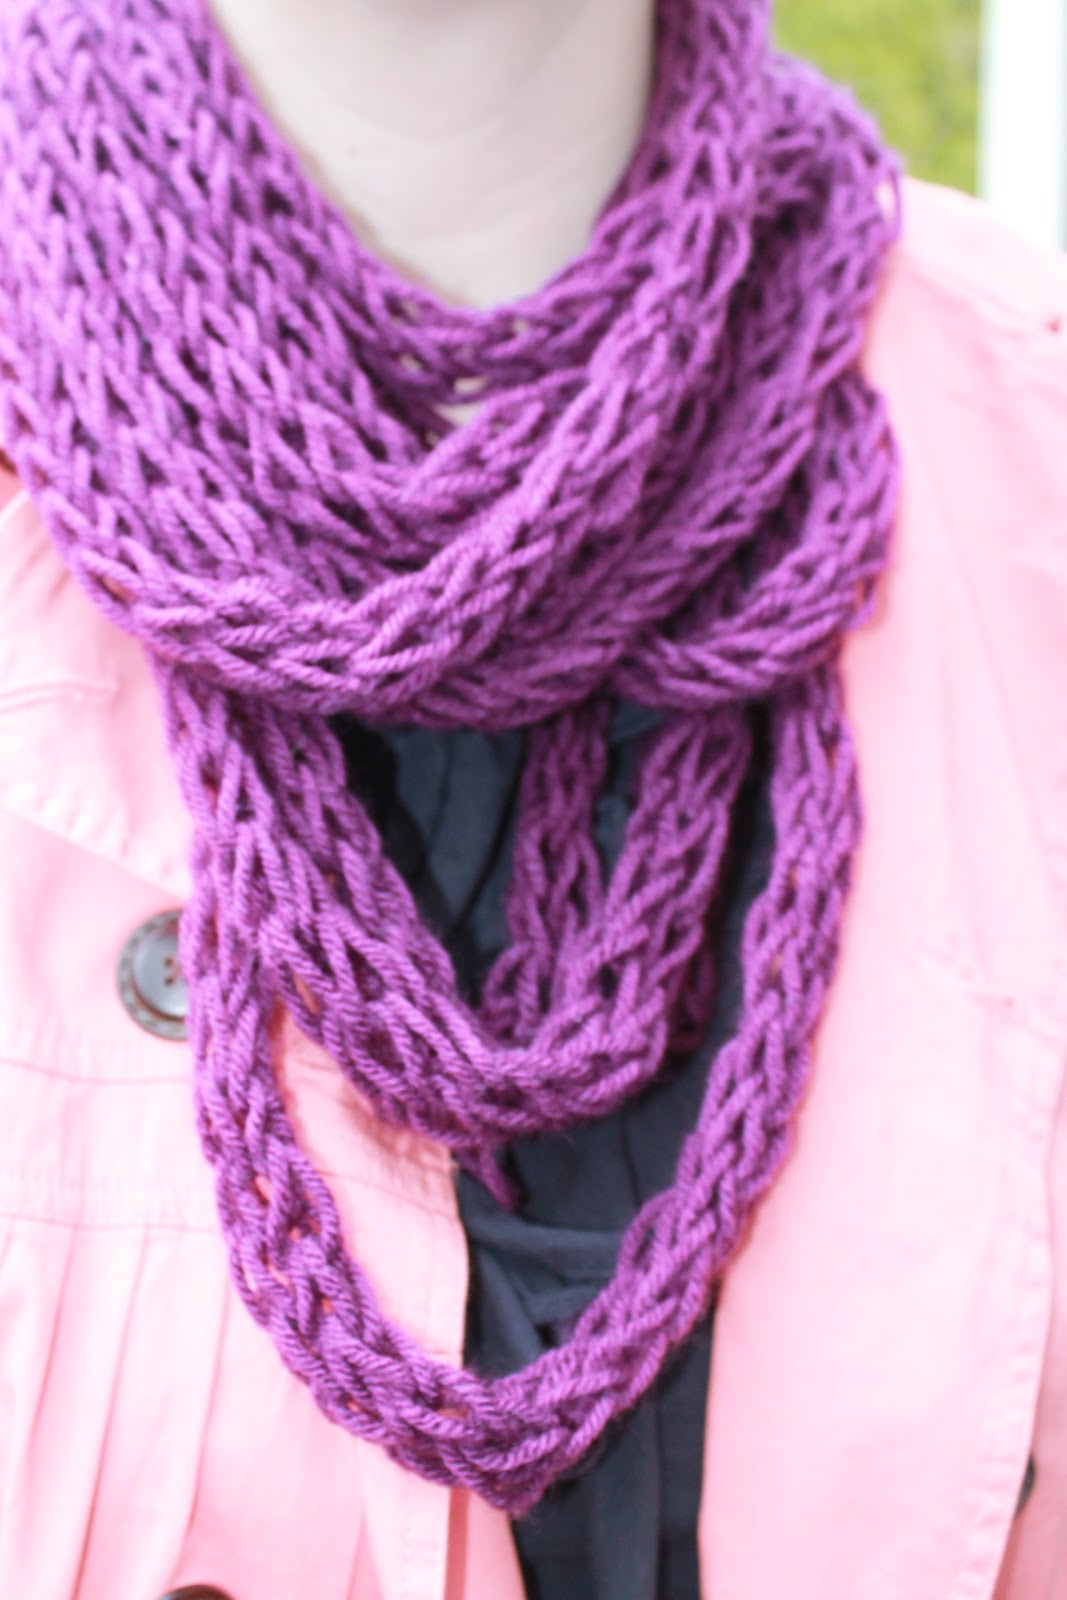 How to Finger Knit a Scarf: Tutorial and Patterns | Stitch ...